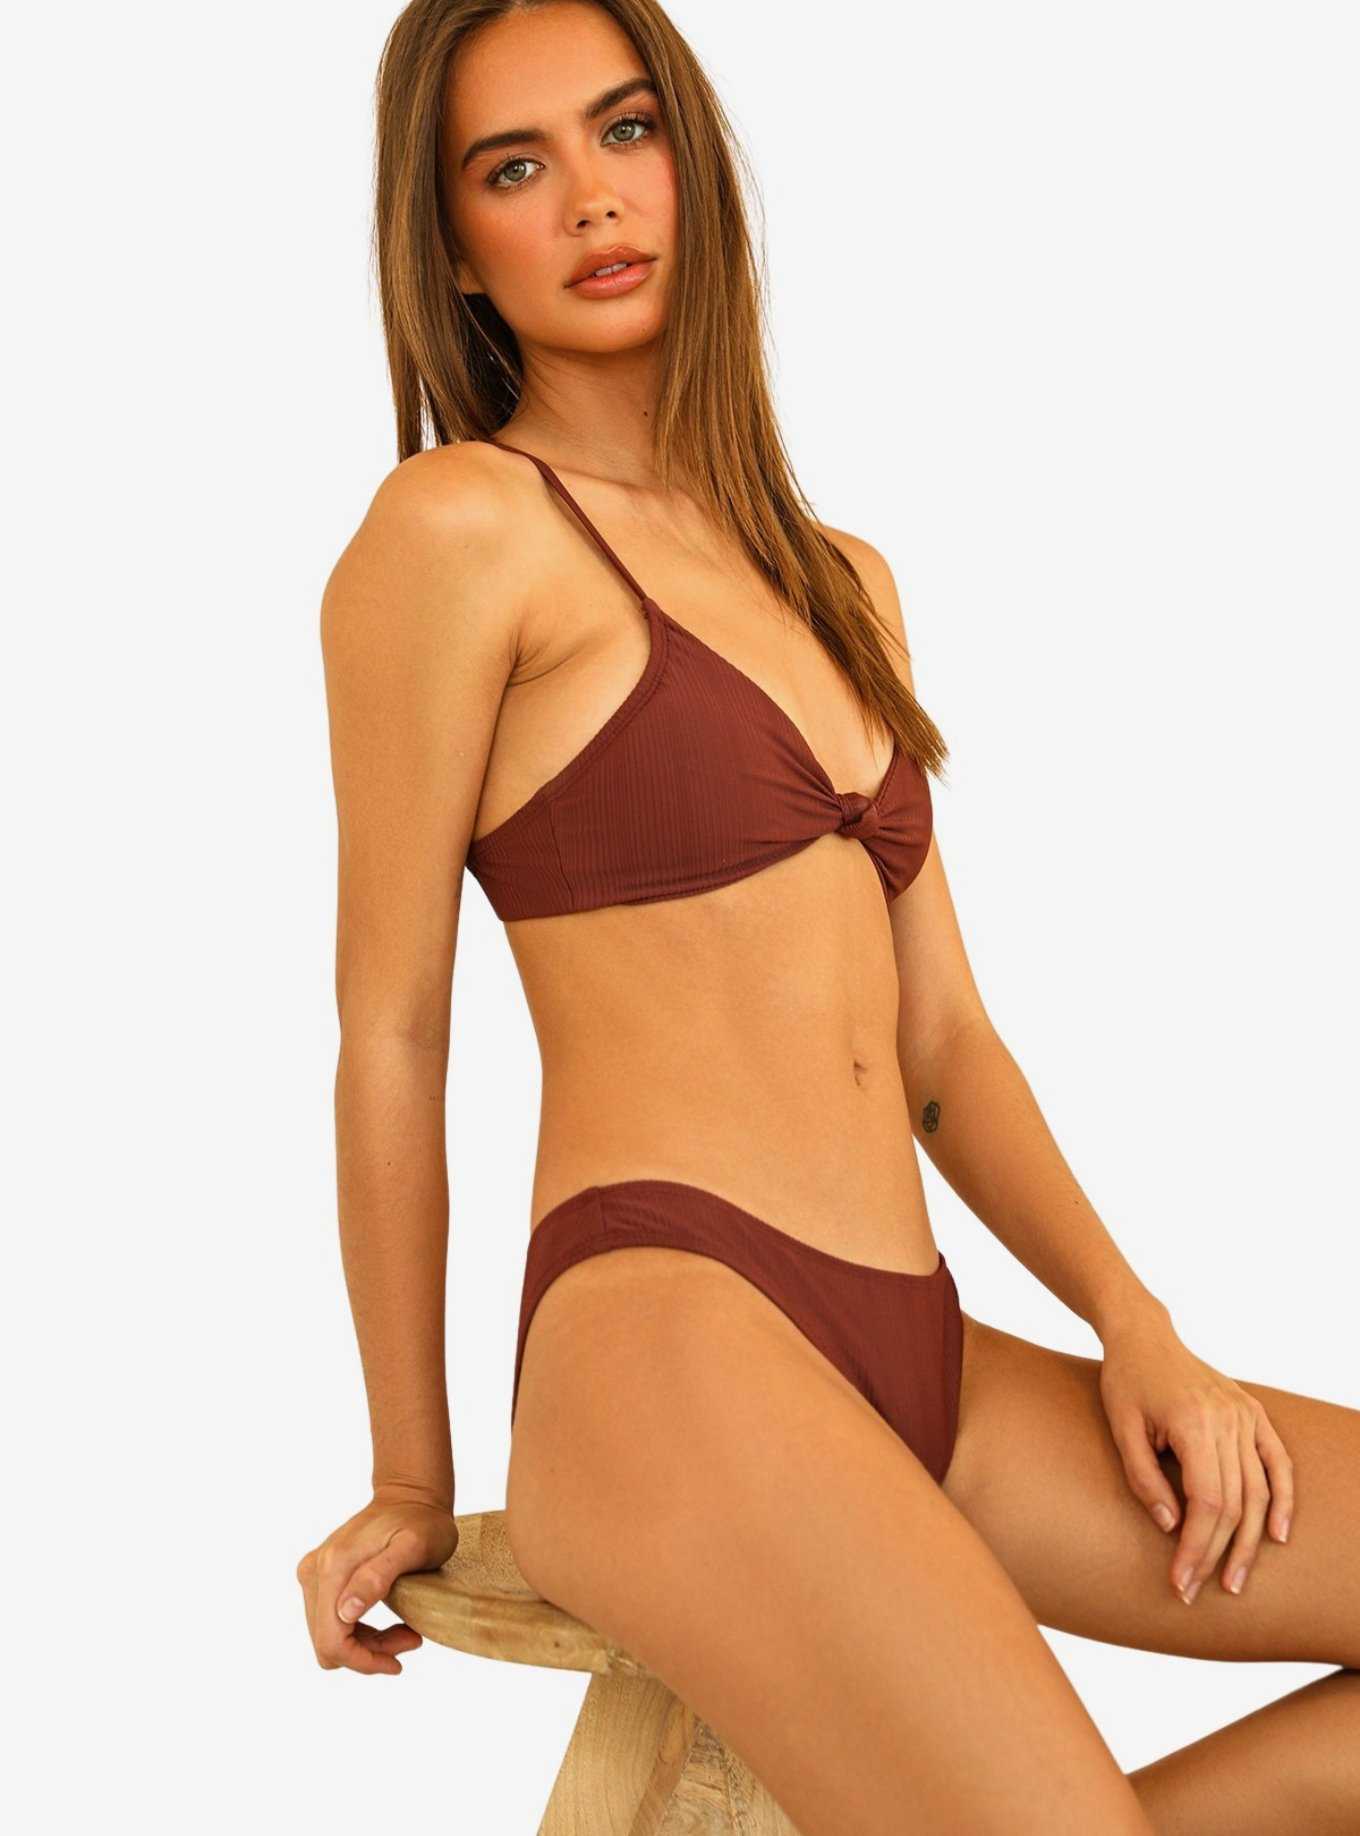 Dippin' Daisy's Nocturnal Swim Bottom Clay Maroon Ribbed, , hi-res